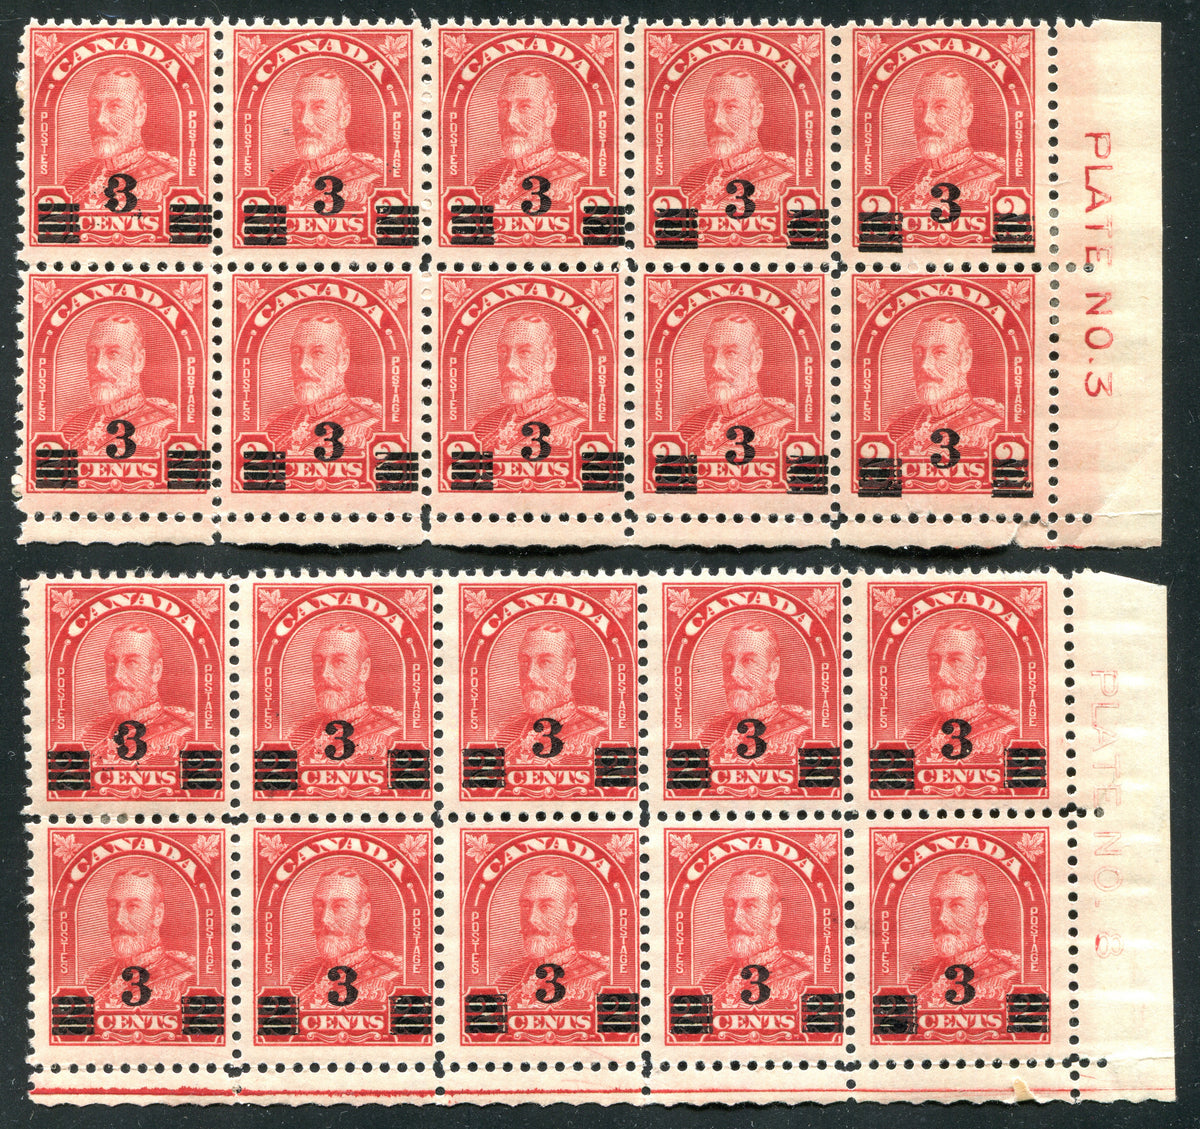 0191CA2005 - Canada #191, 191a - Mint Plate Blocks of 10, UNLISTED Varieties